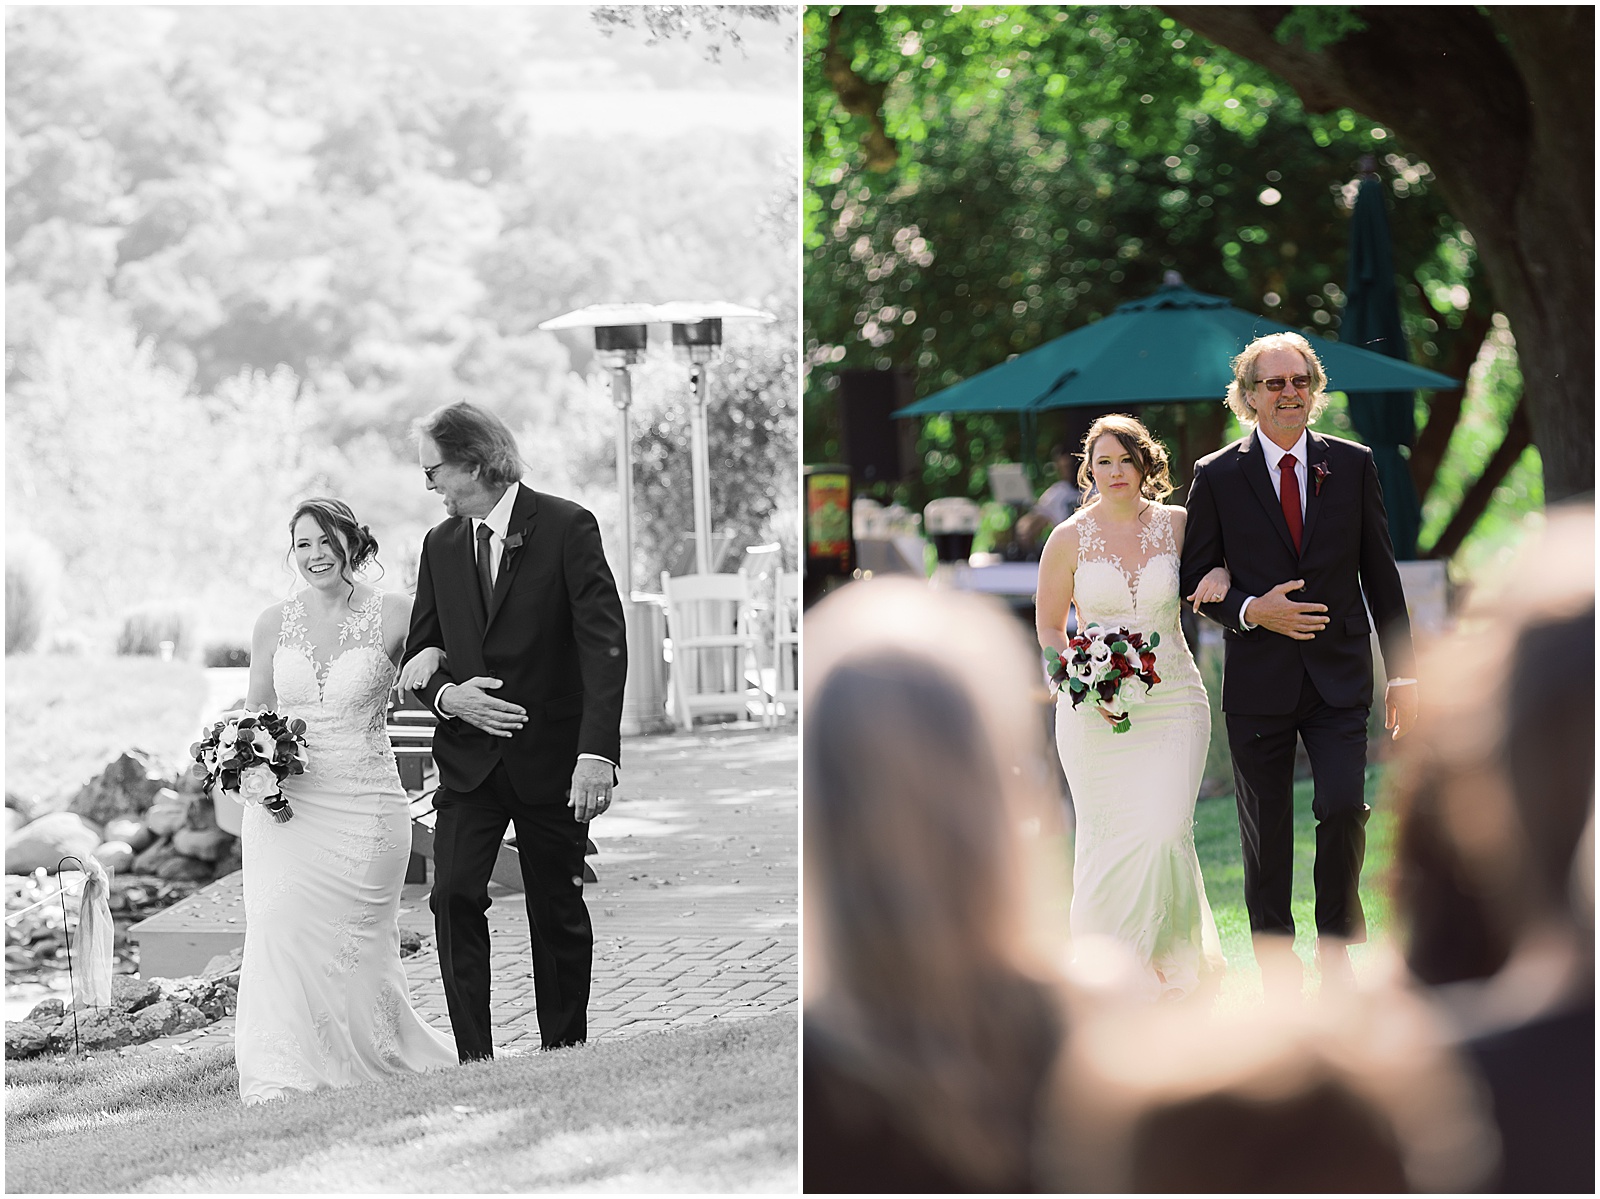 two images of the bride walking down the aisle with her dad